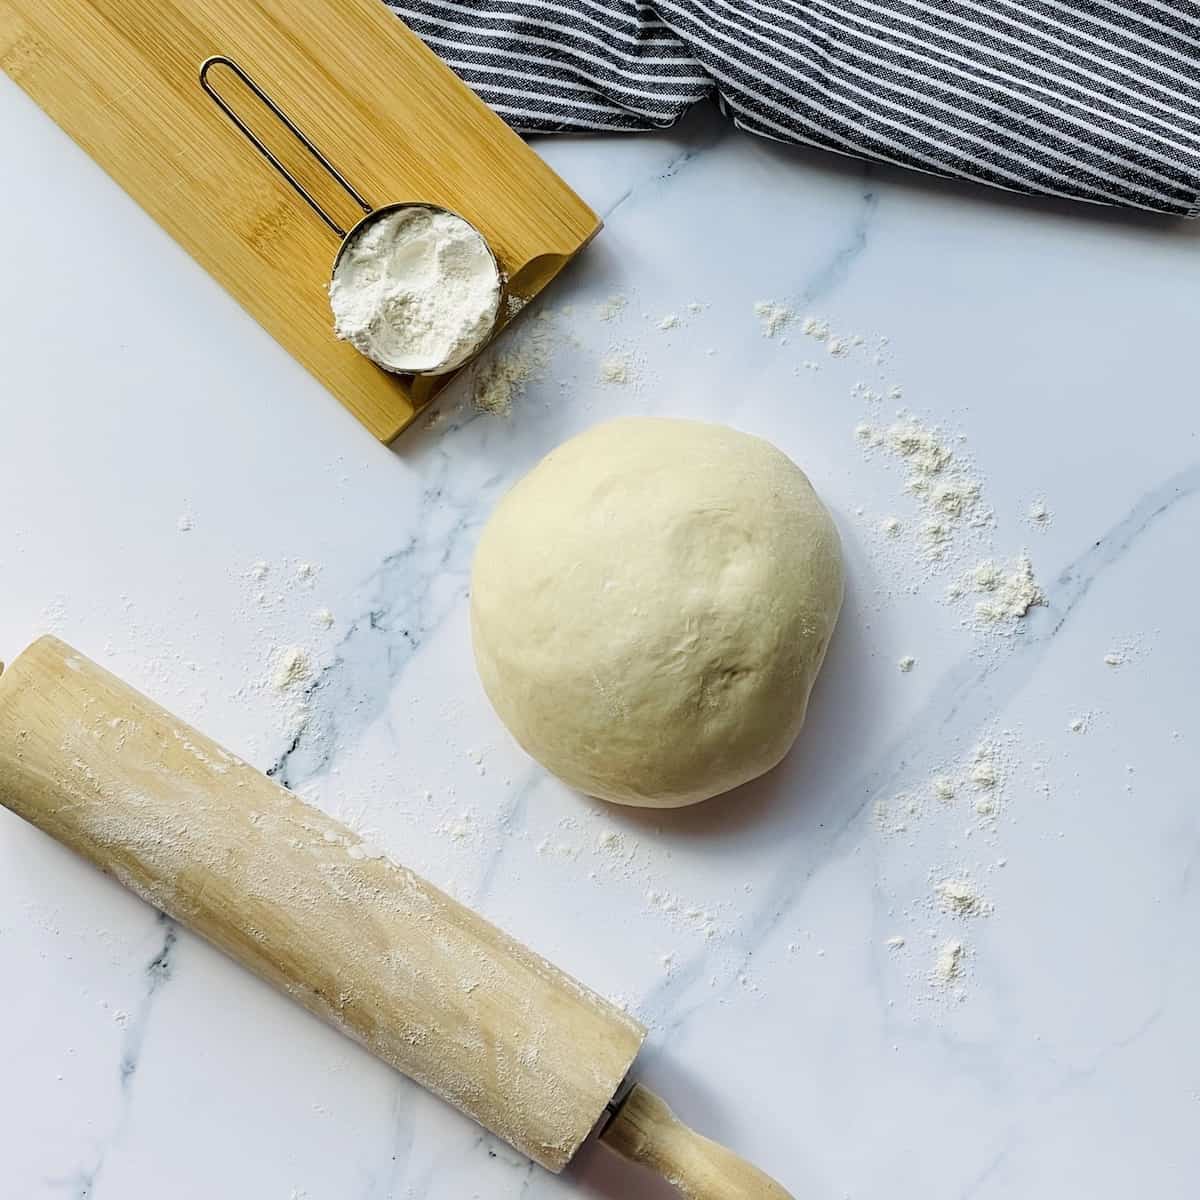 pizza dough ball rising on a white background